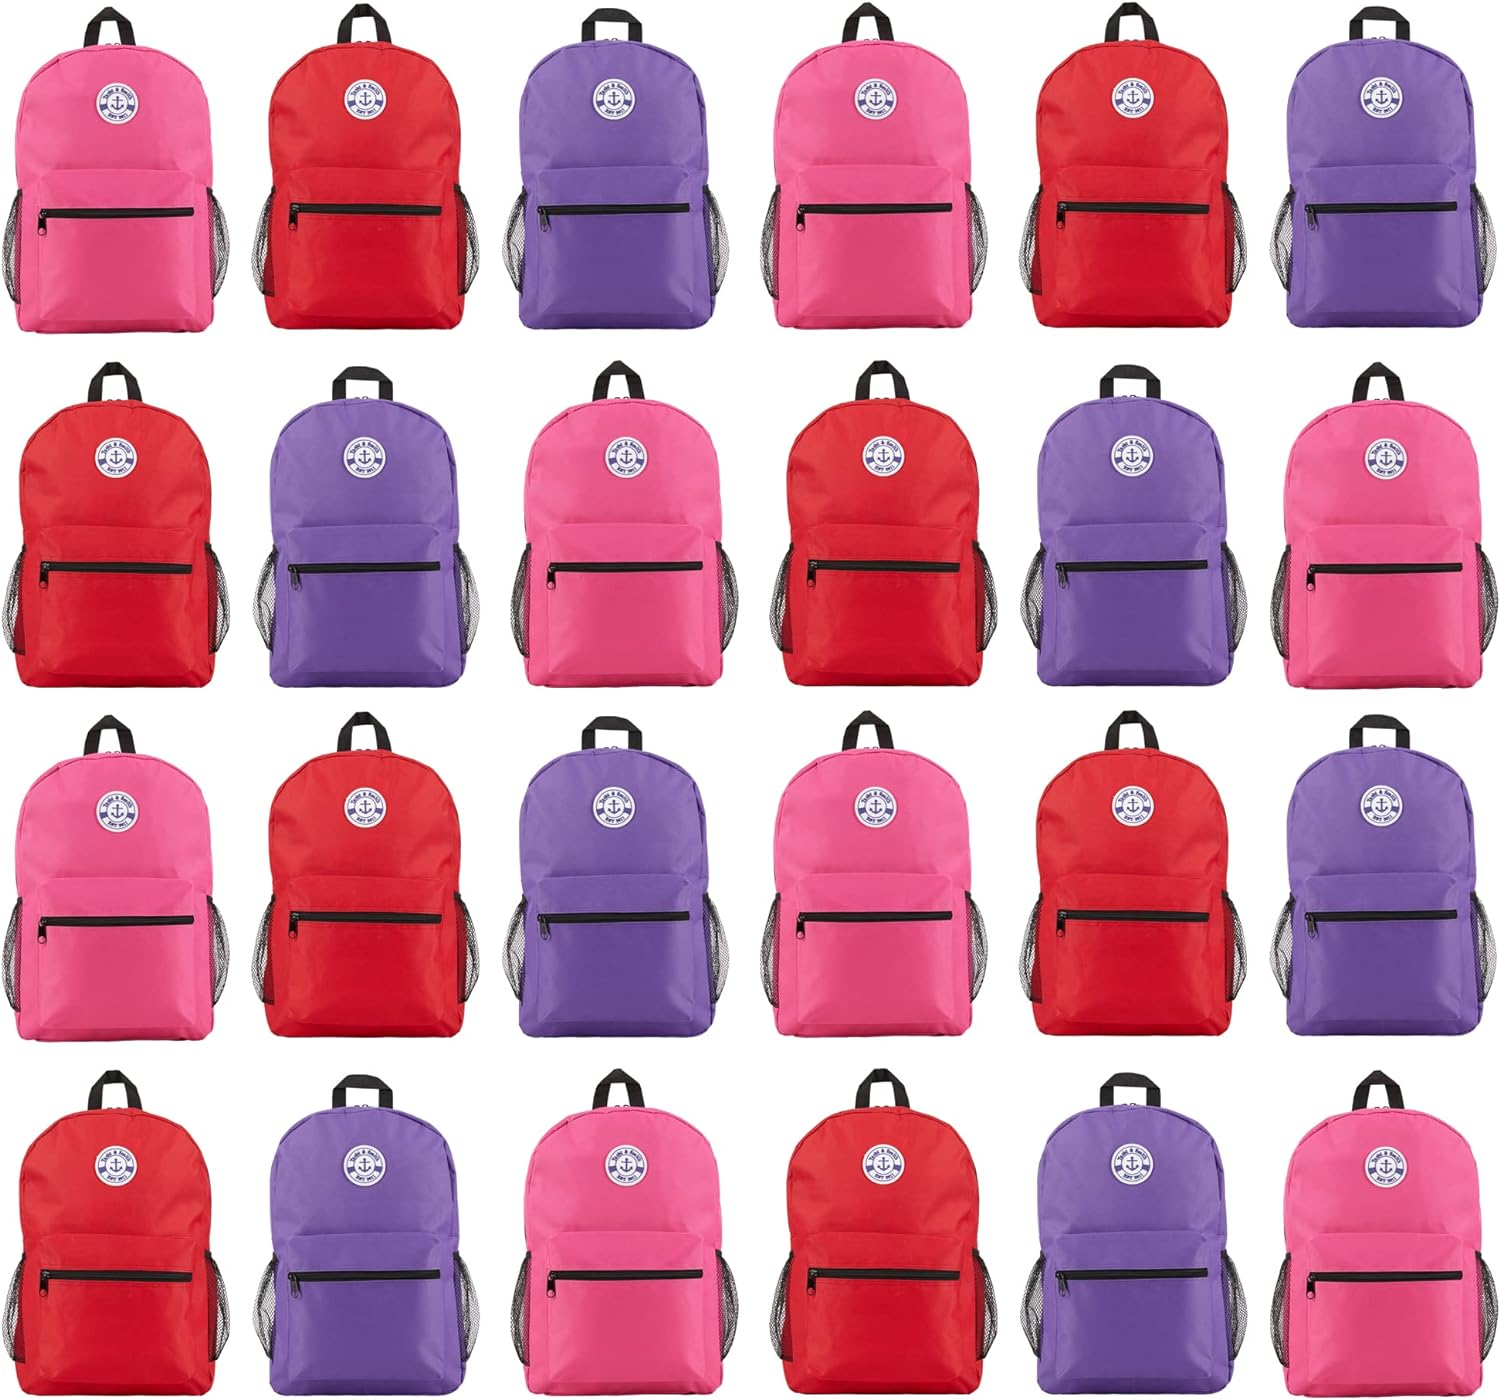 Yacht & Smith 24 Pack 17 Inch Wholesale Backpacks for Kids, 12 Assorted Colors - Bulk Case of Bookbags Water Resistant Knapsacks